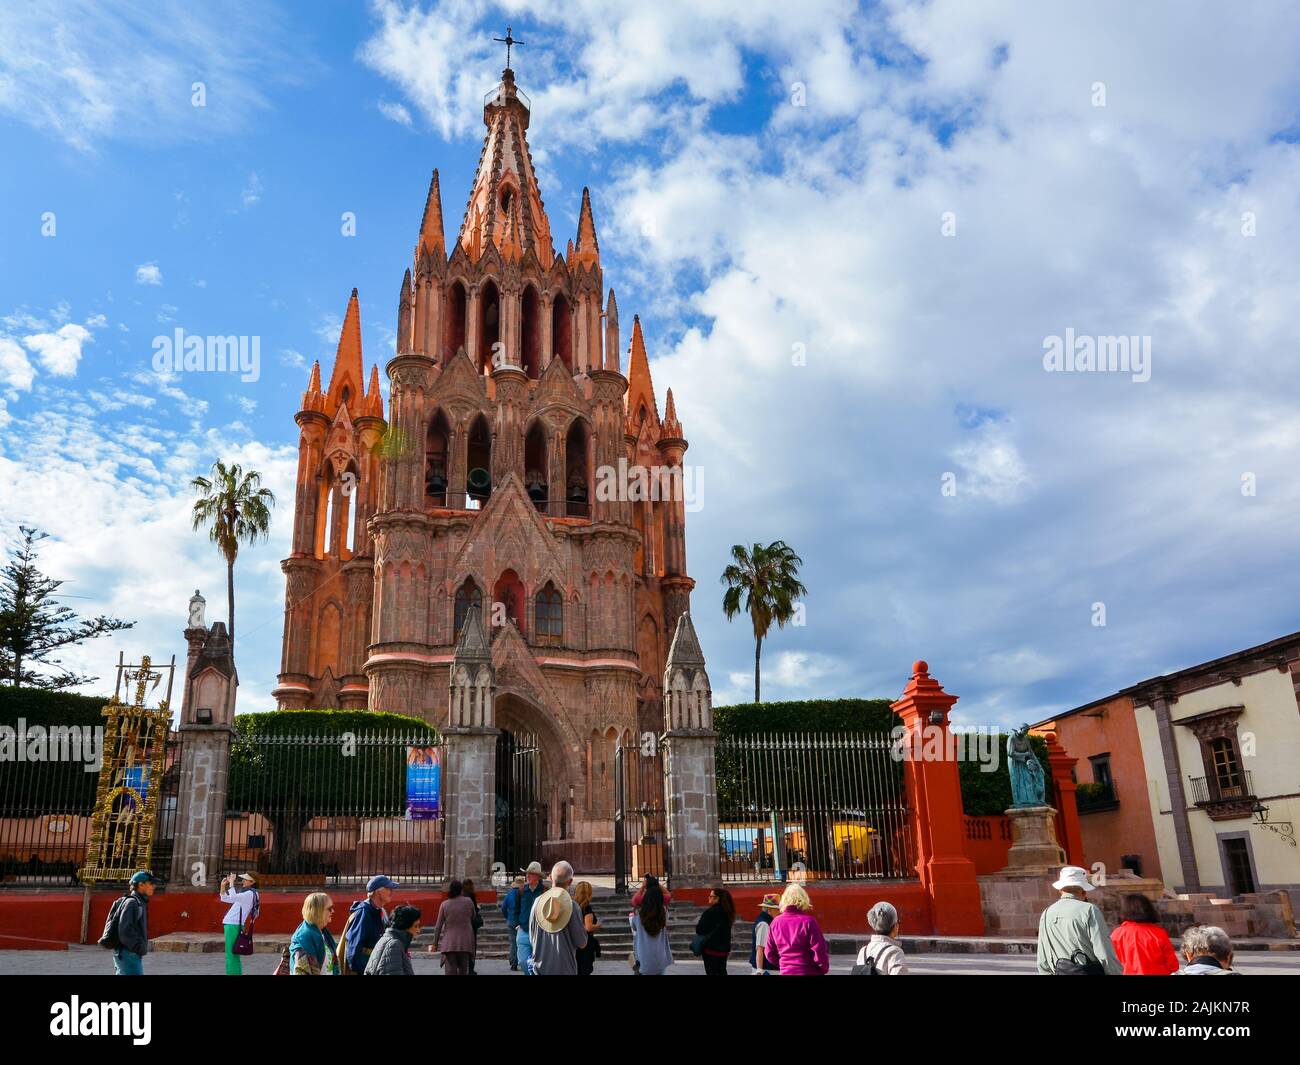 San Miguel de Allende, Mexico - Oct. 22, 2019: Crowd of tourists gather in front of Church of Saint Michael The Archangel. Stock Photo